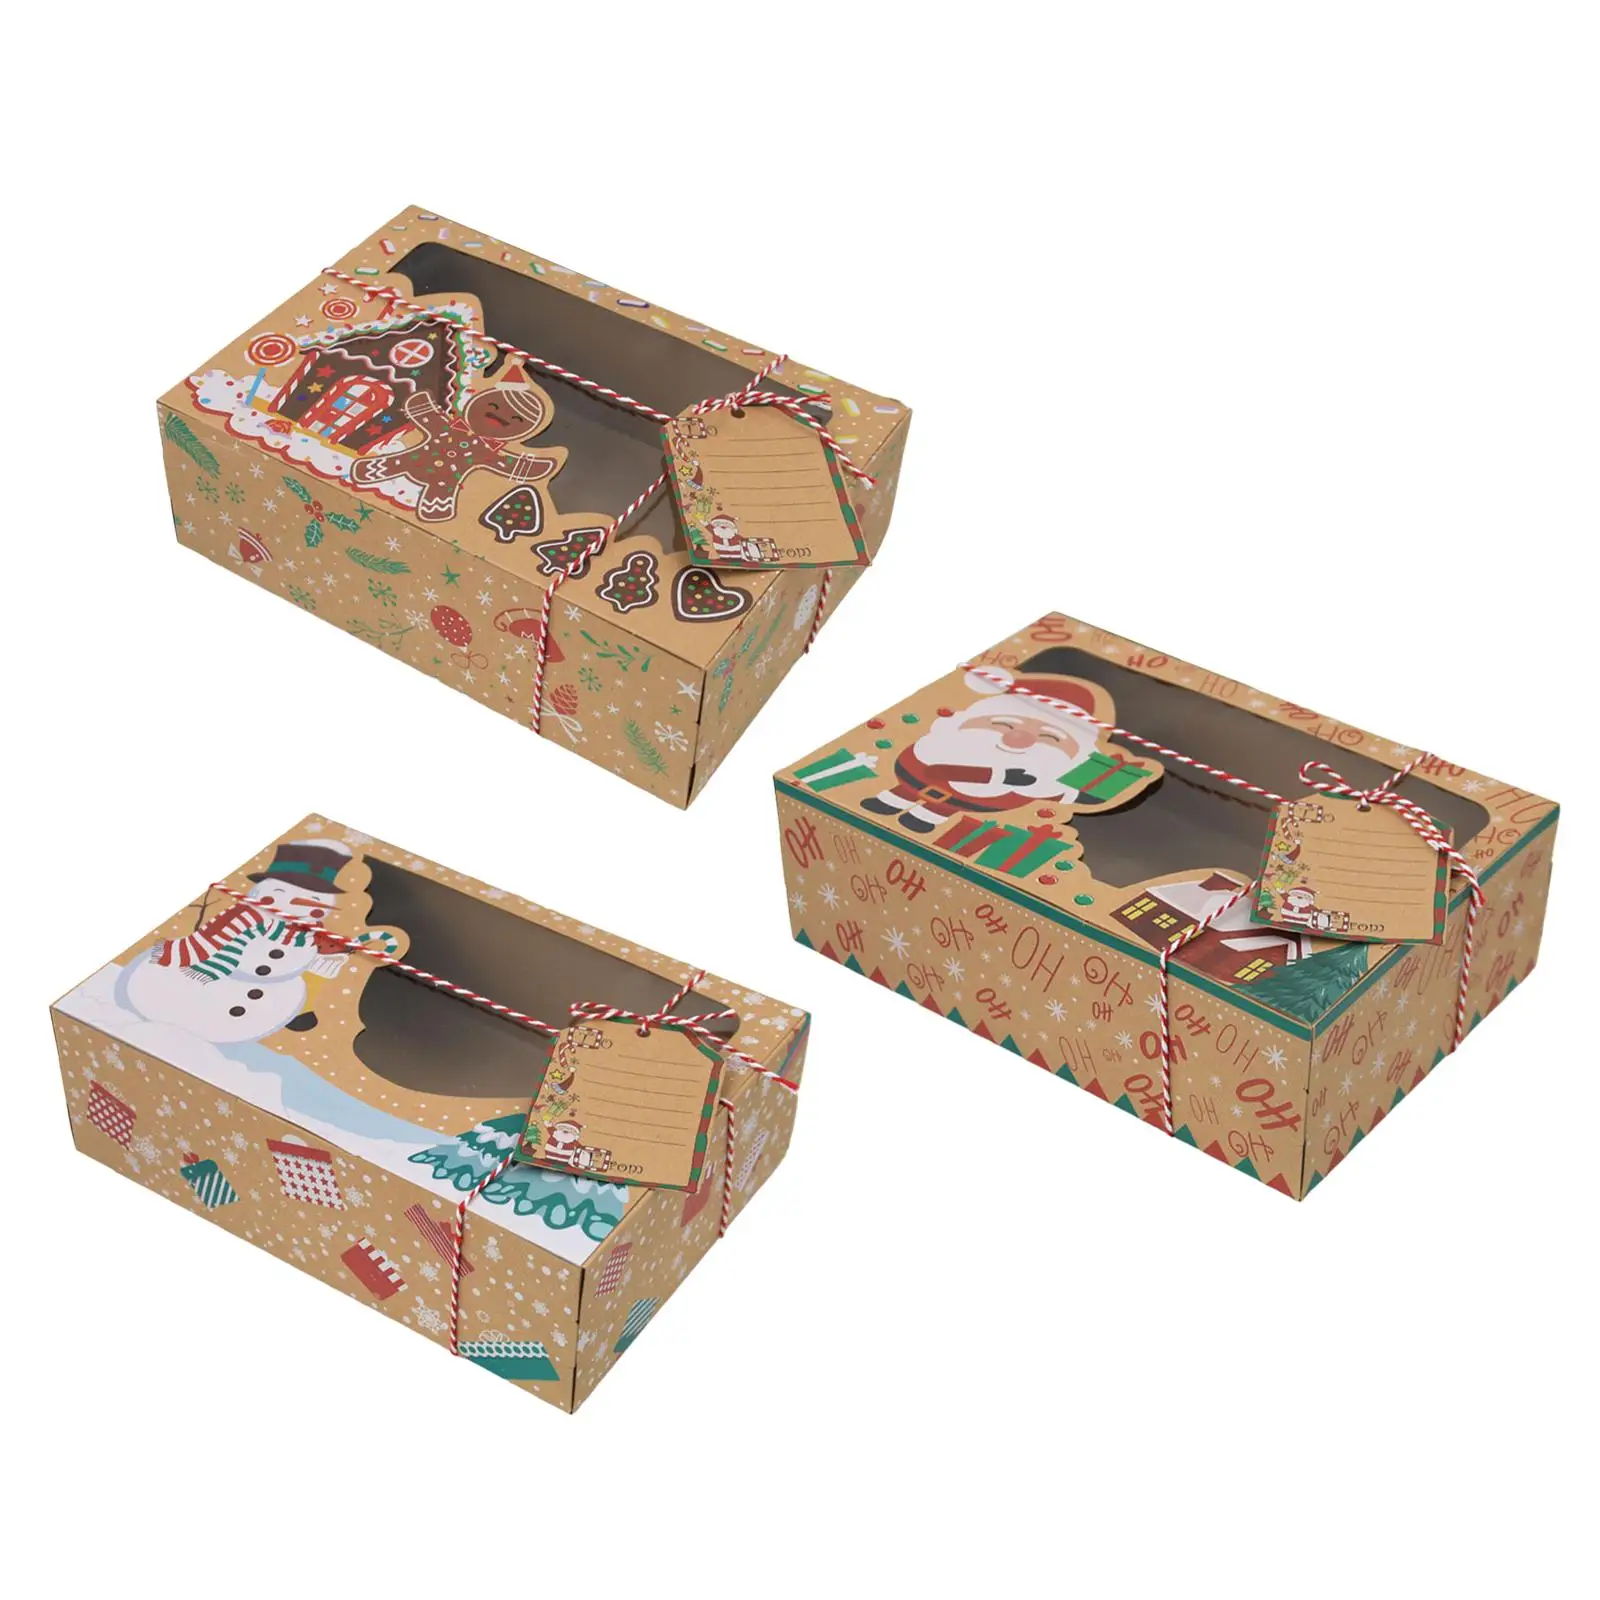 3Pcs Christmas Treat Boxes with Clear Window Bakery Boxes Biscuit Bag Xmas Gift Boxes for Chocolate Donuts Party Supplies